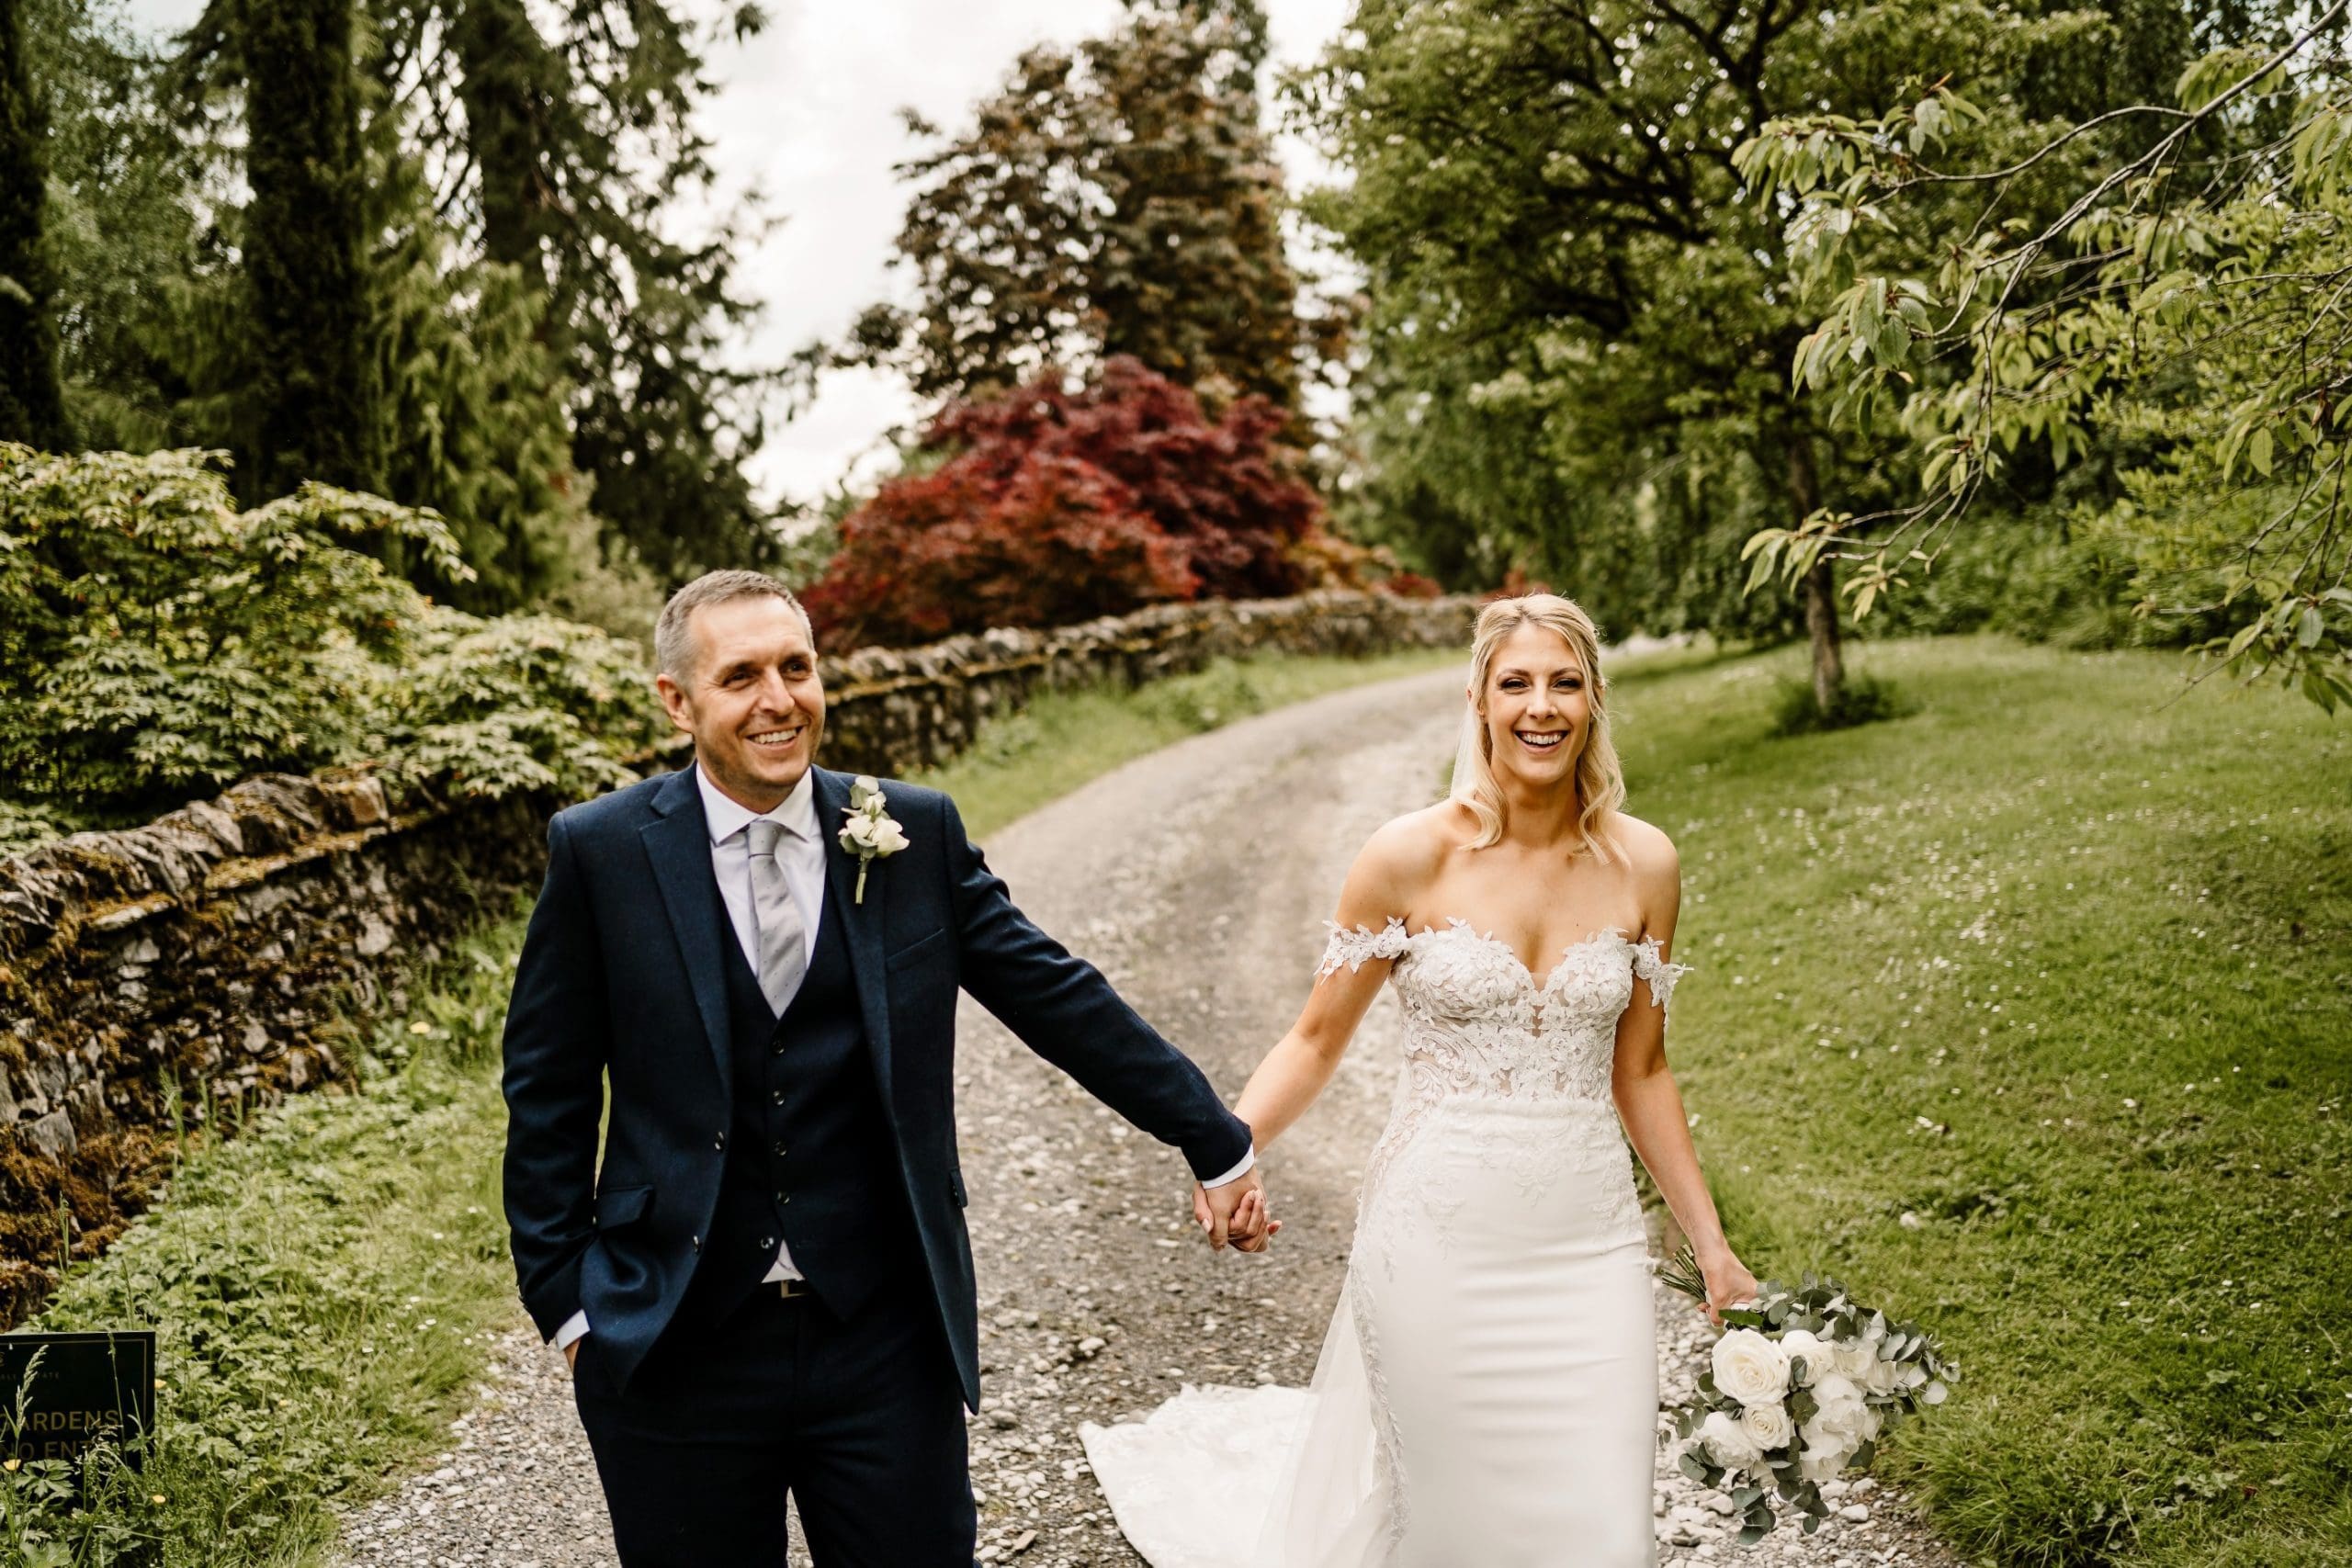 Samantha and her husband with Samantha wearing the Martha by Blue By Enzoani dress<br />
